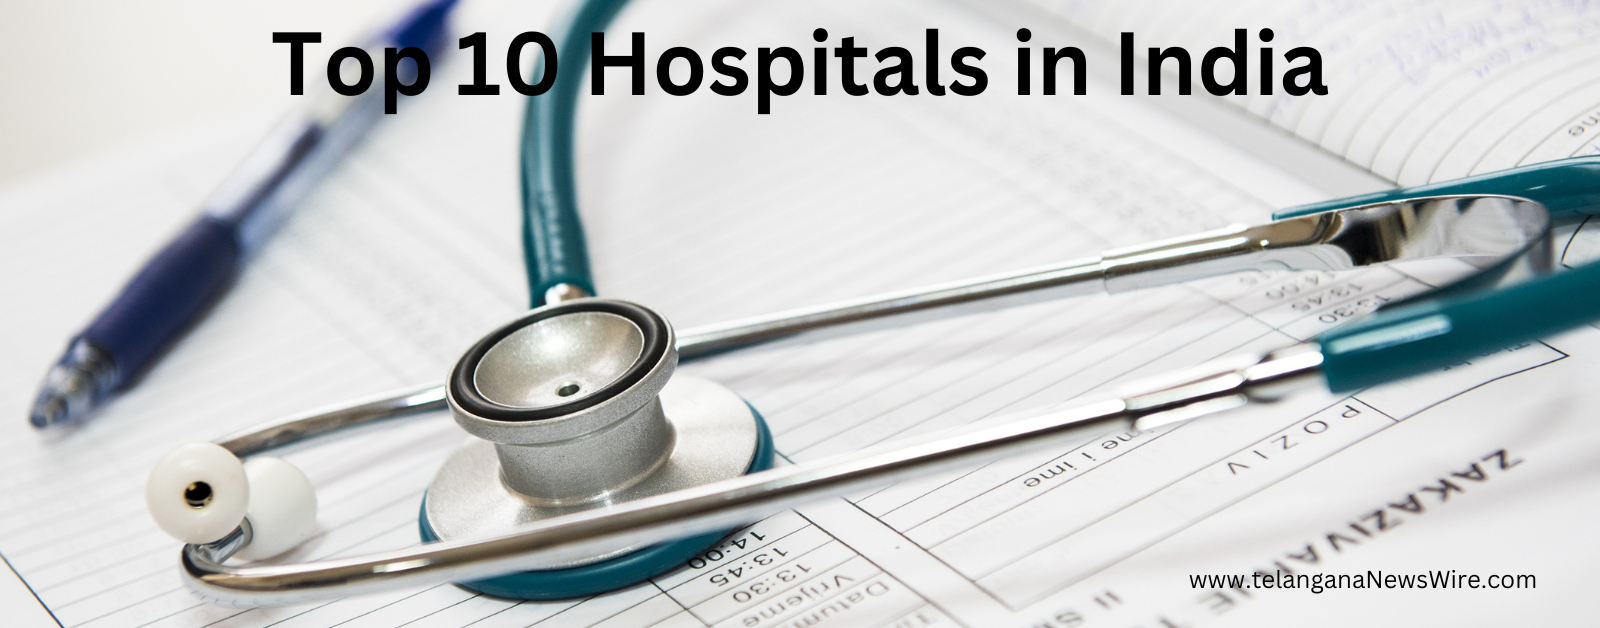 TOP 10 Hospitals In India